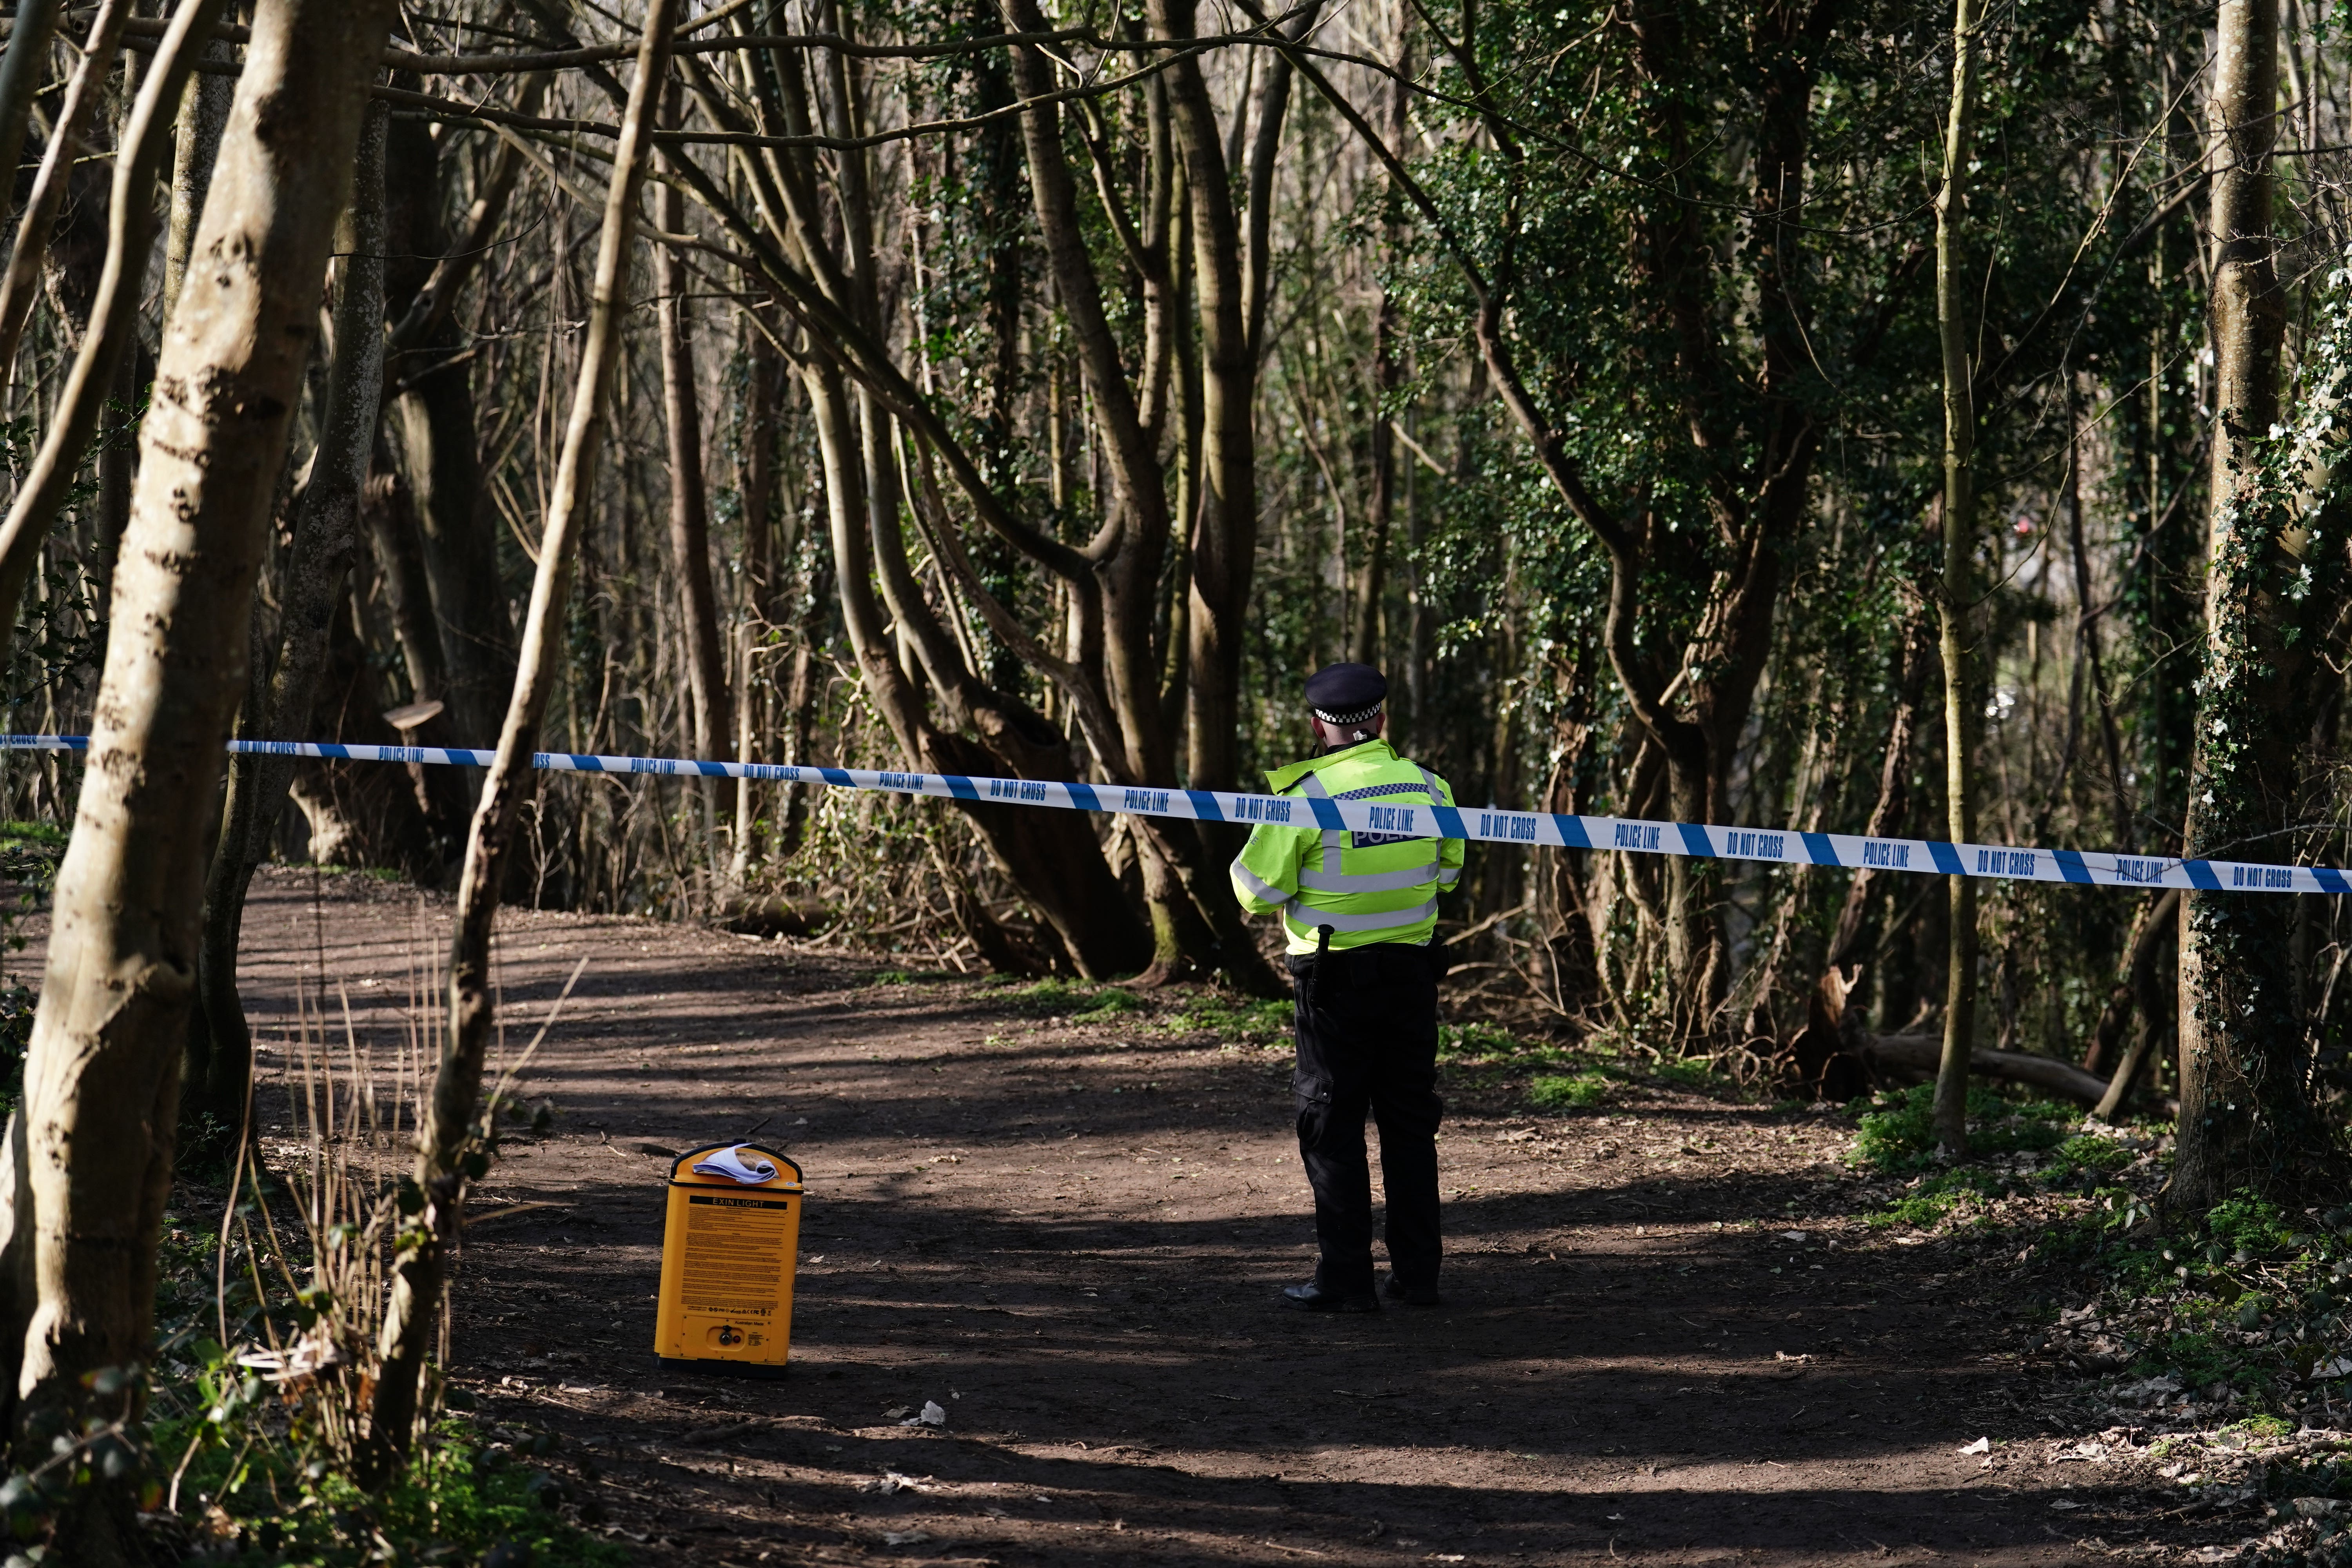 Police searching in woodland area in Brighton, East Sussex, near to where the baby’s remains were found